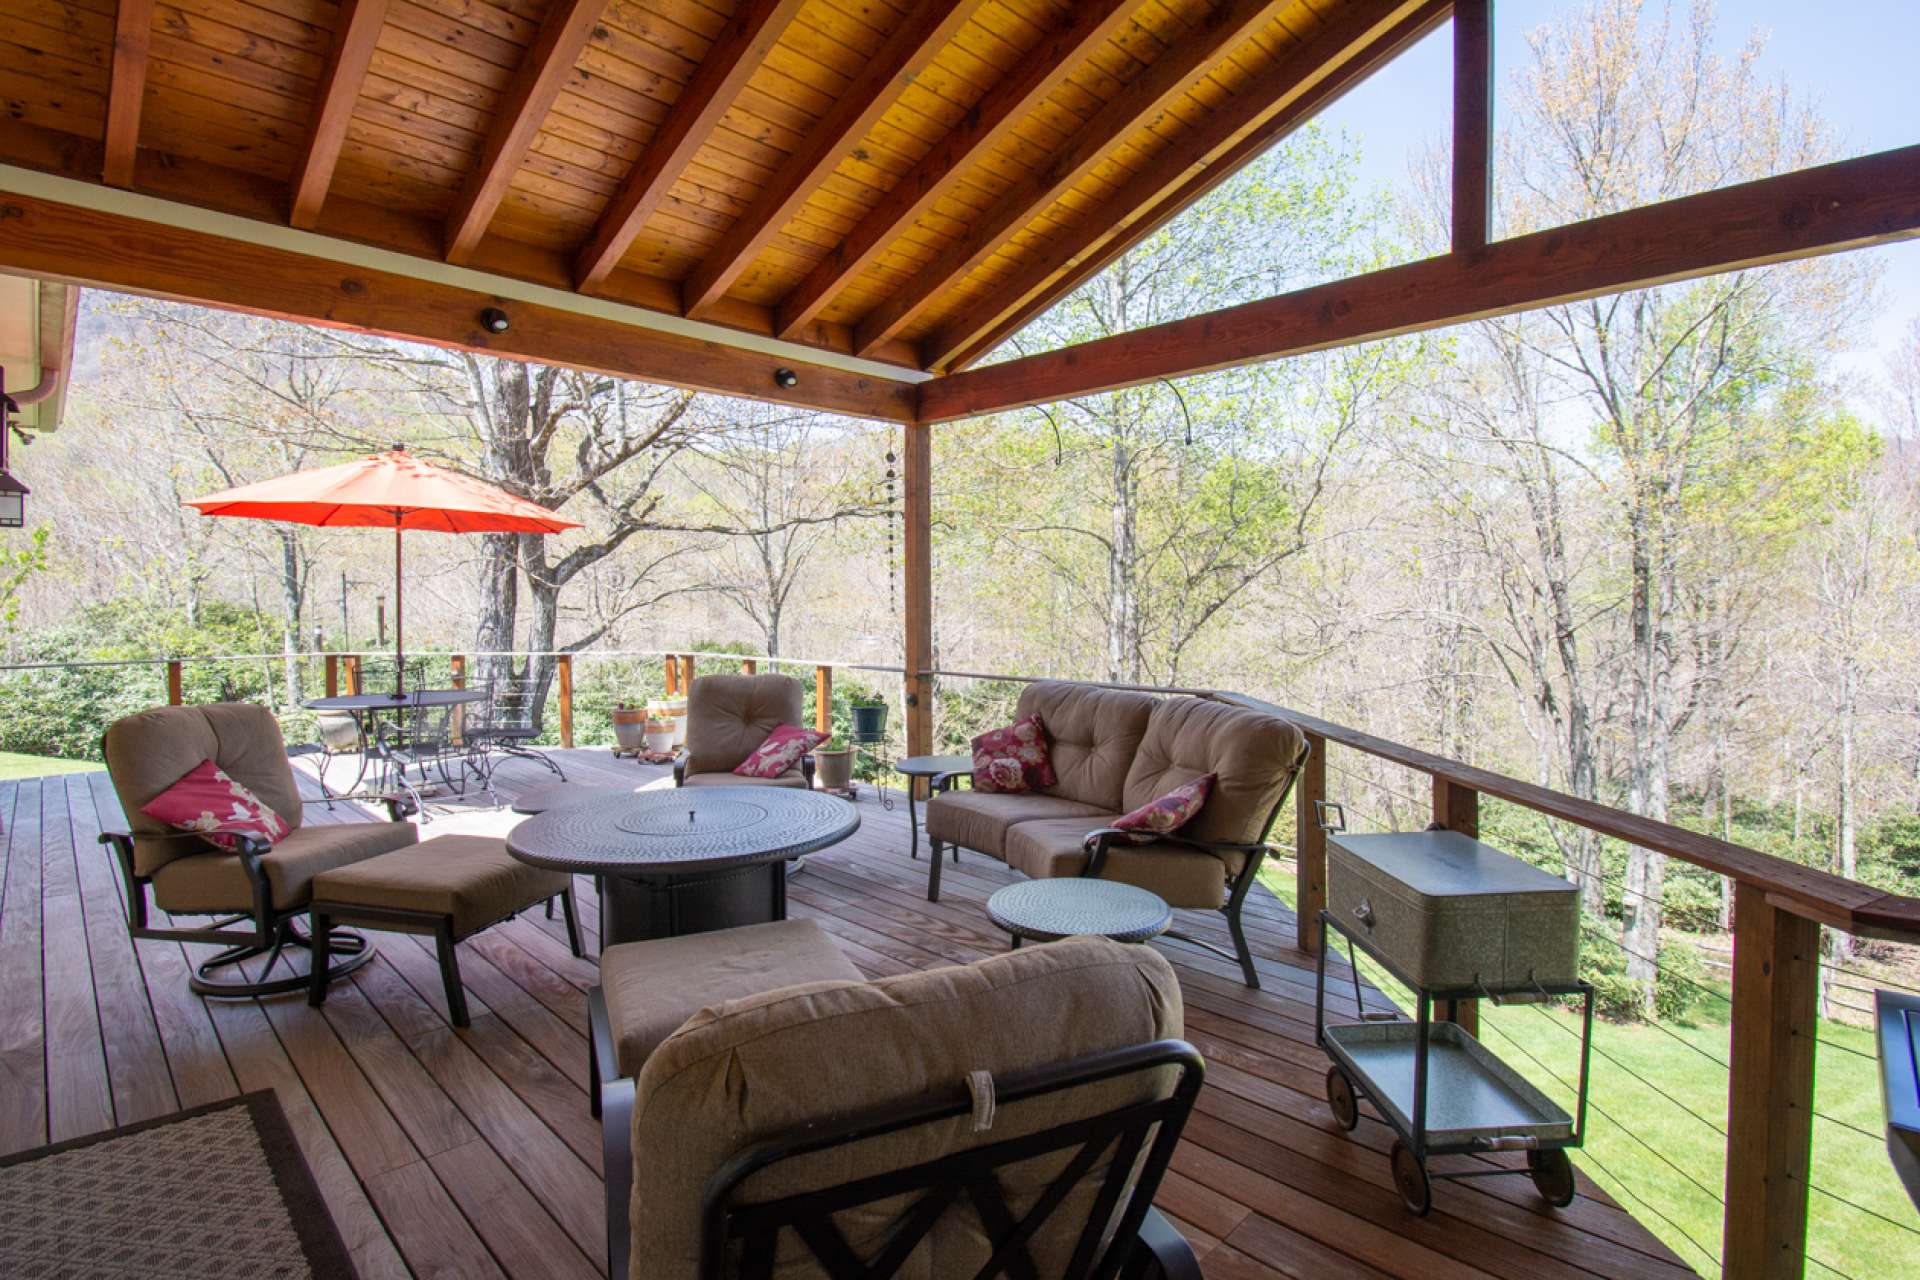 You’ll love the way the spacious great room expands onto this covered deck perfect for entertaining…